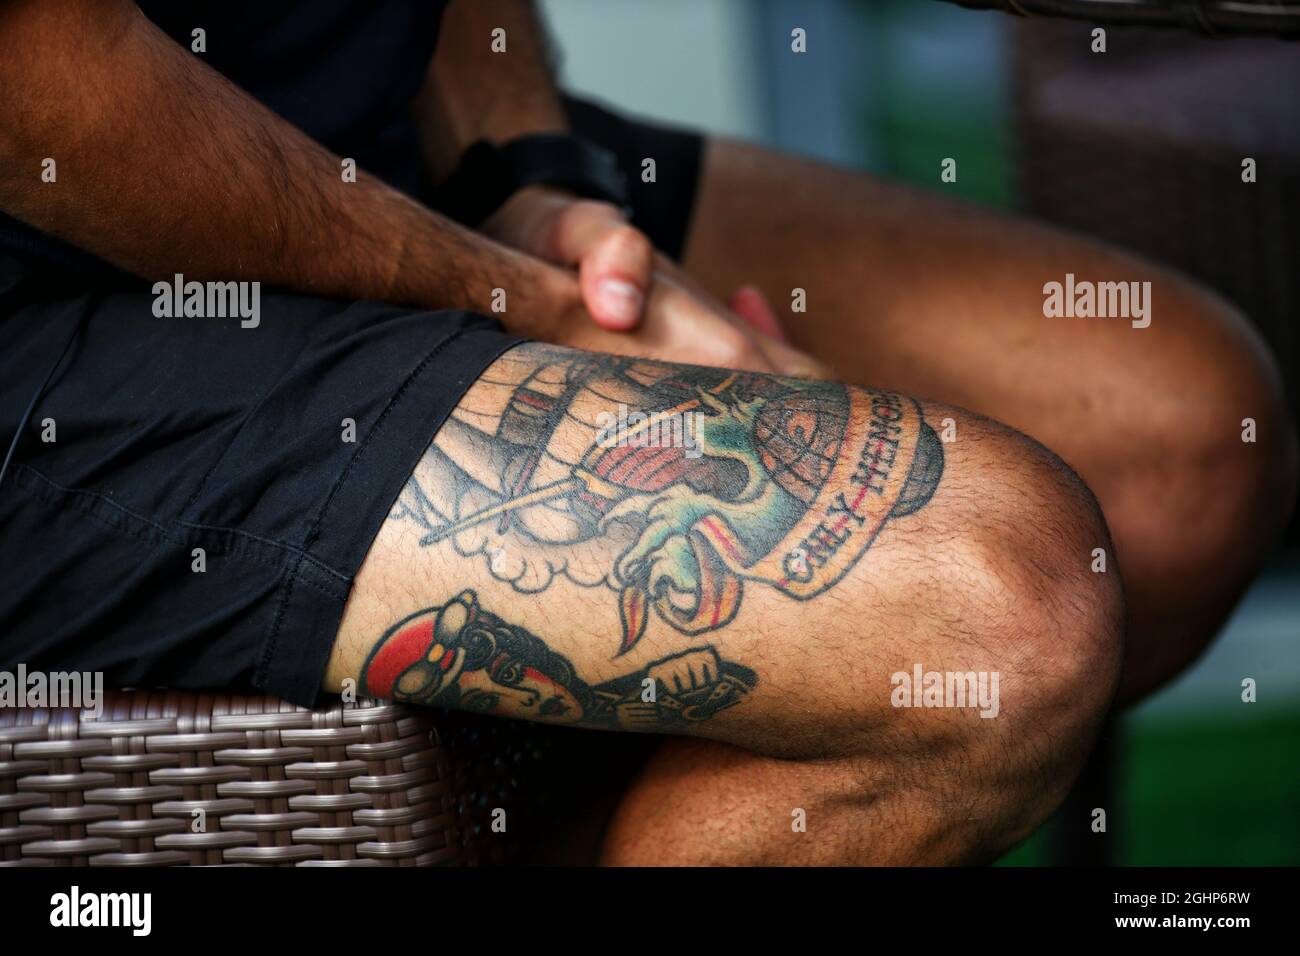 80 Alonso Tattoo Stock Photos HighRes Pictures and Images  Getty Images